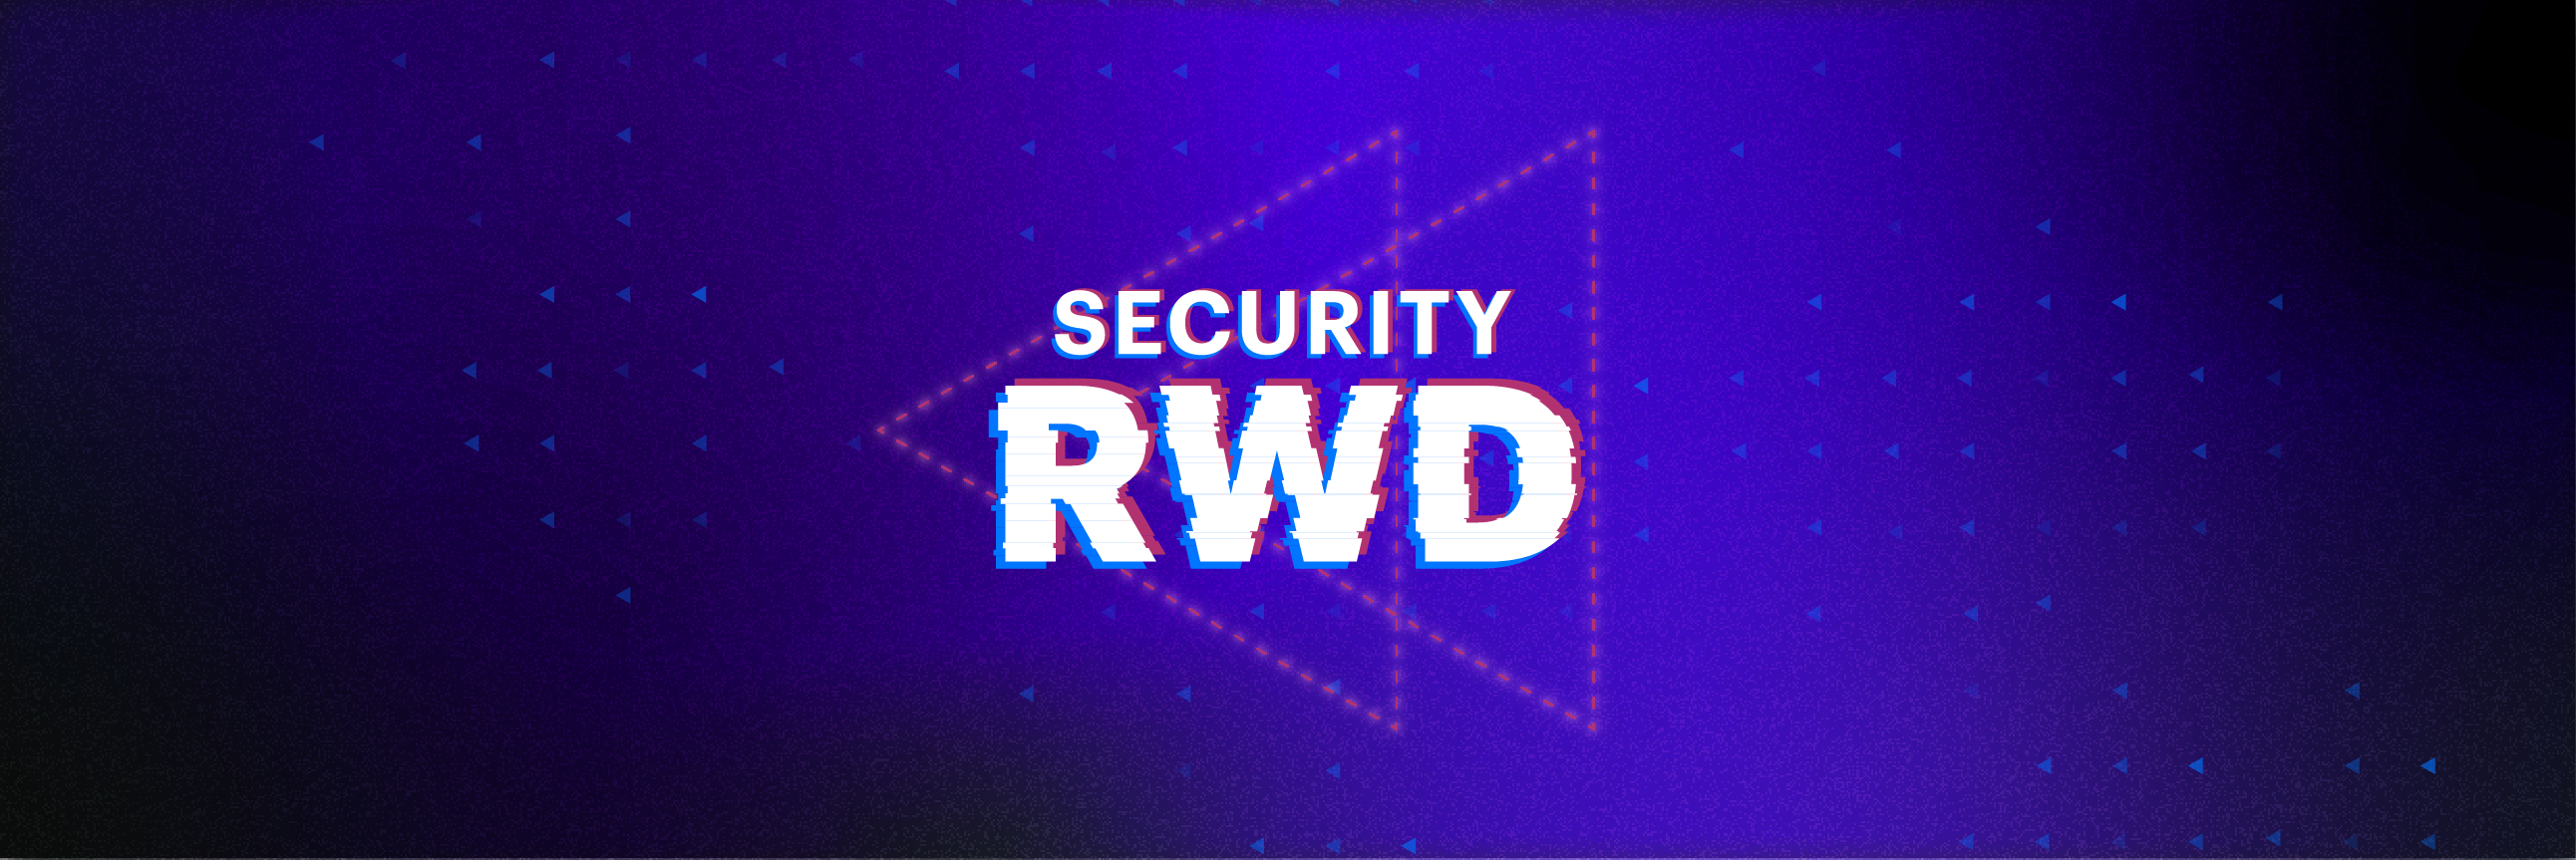 SecurityRWD - Introduction to AWS Simple Storage Service (S3)